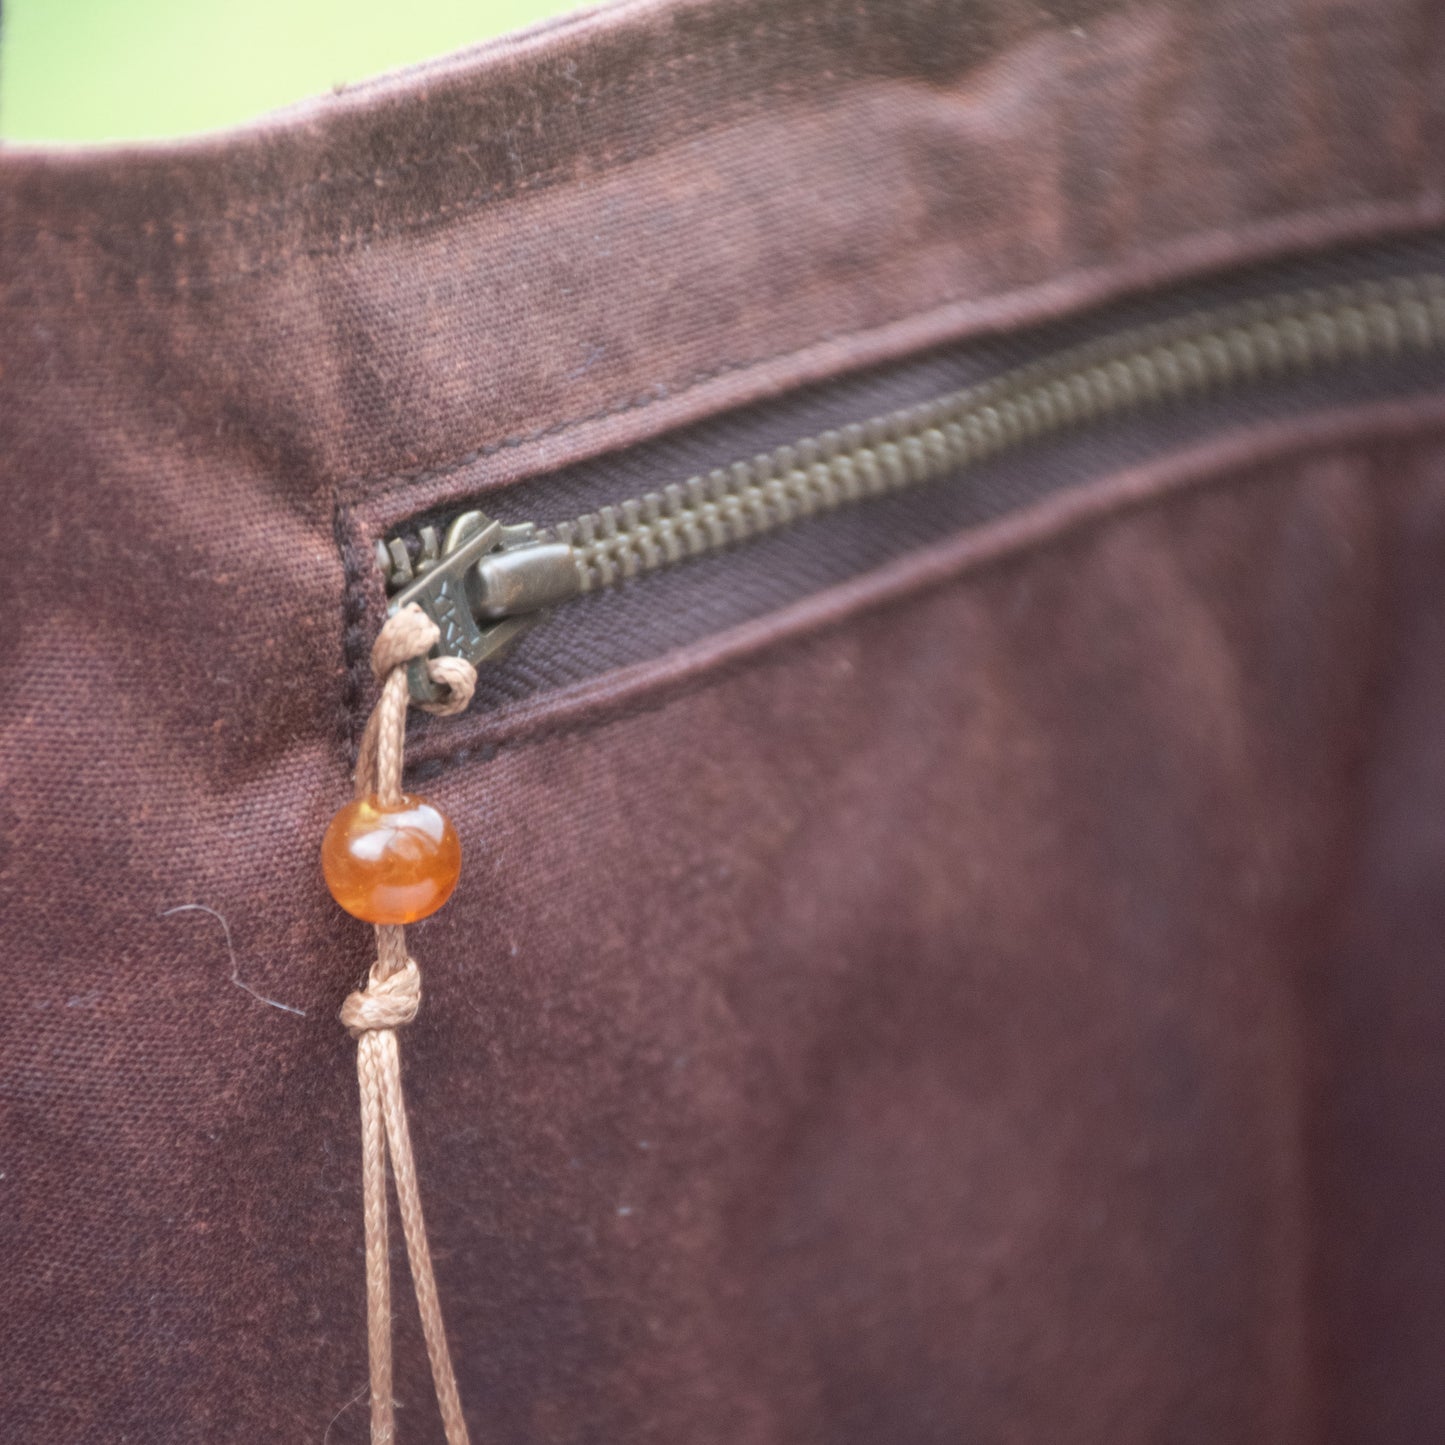 Waxed Canvas Large Bag ~ Chestnut Brown